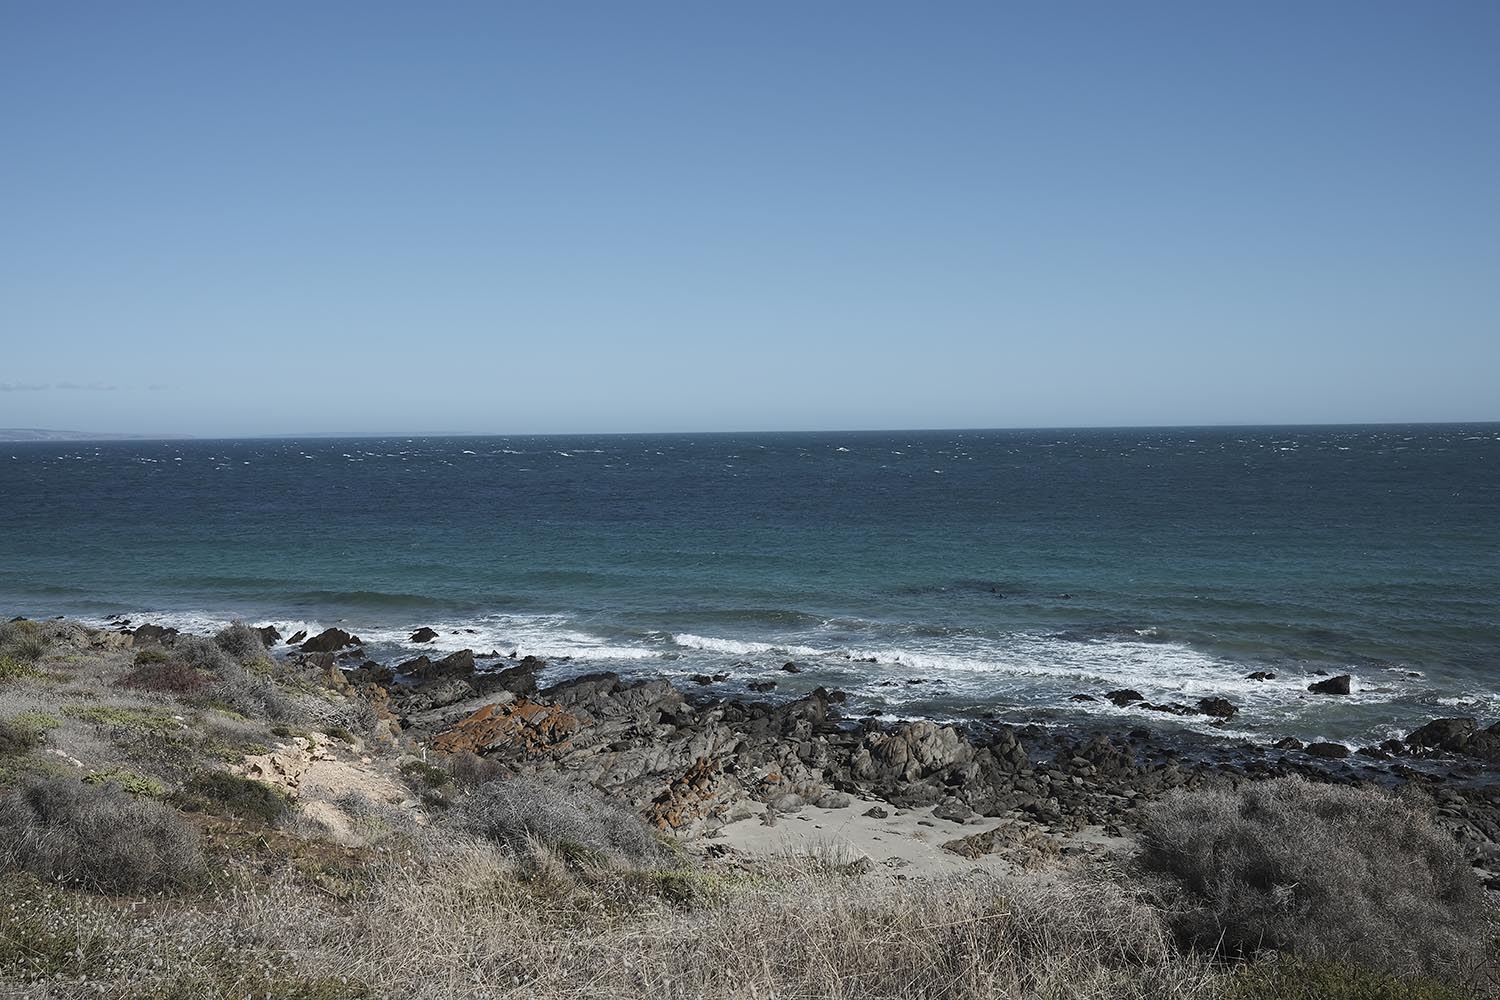 Heysen Trail, Cape Jervis, a pod of dolphins swimming along the beach.